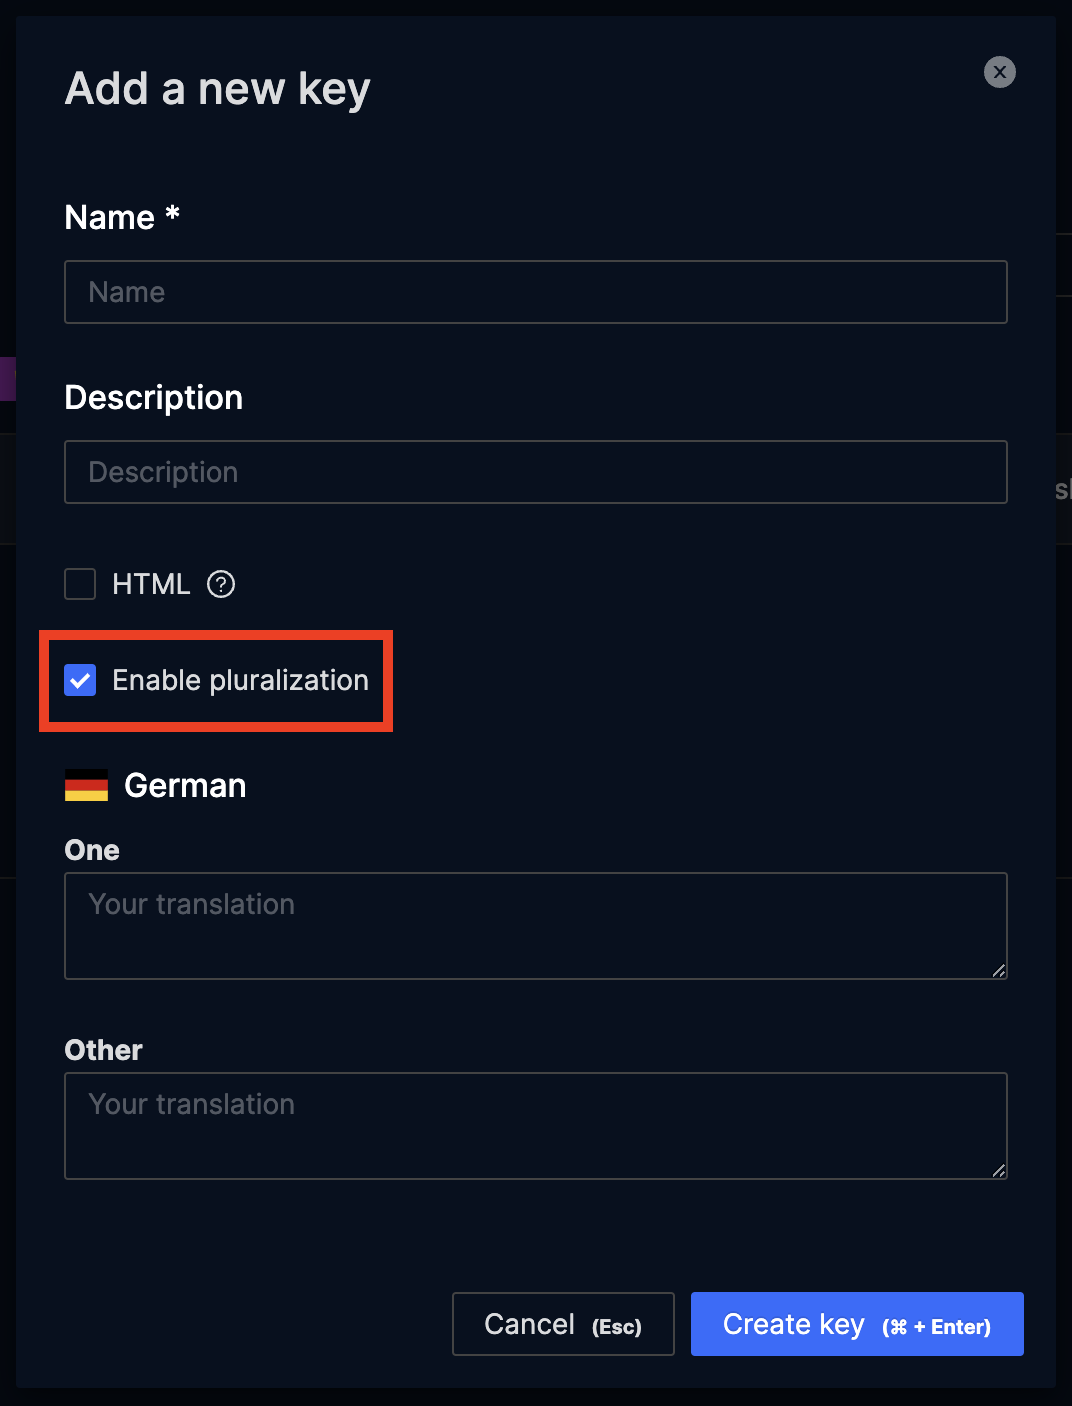 Enable pluralization while adding a new key